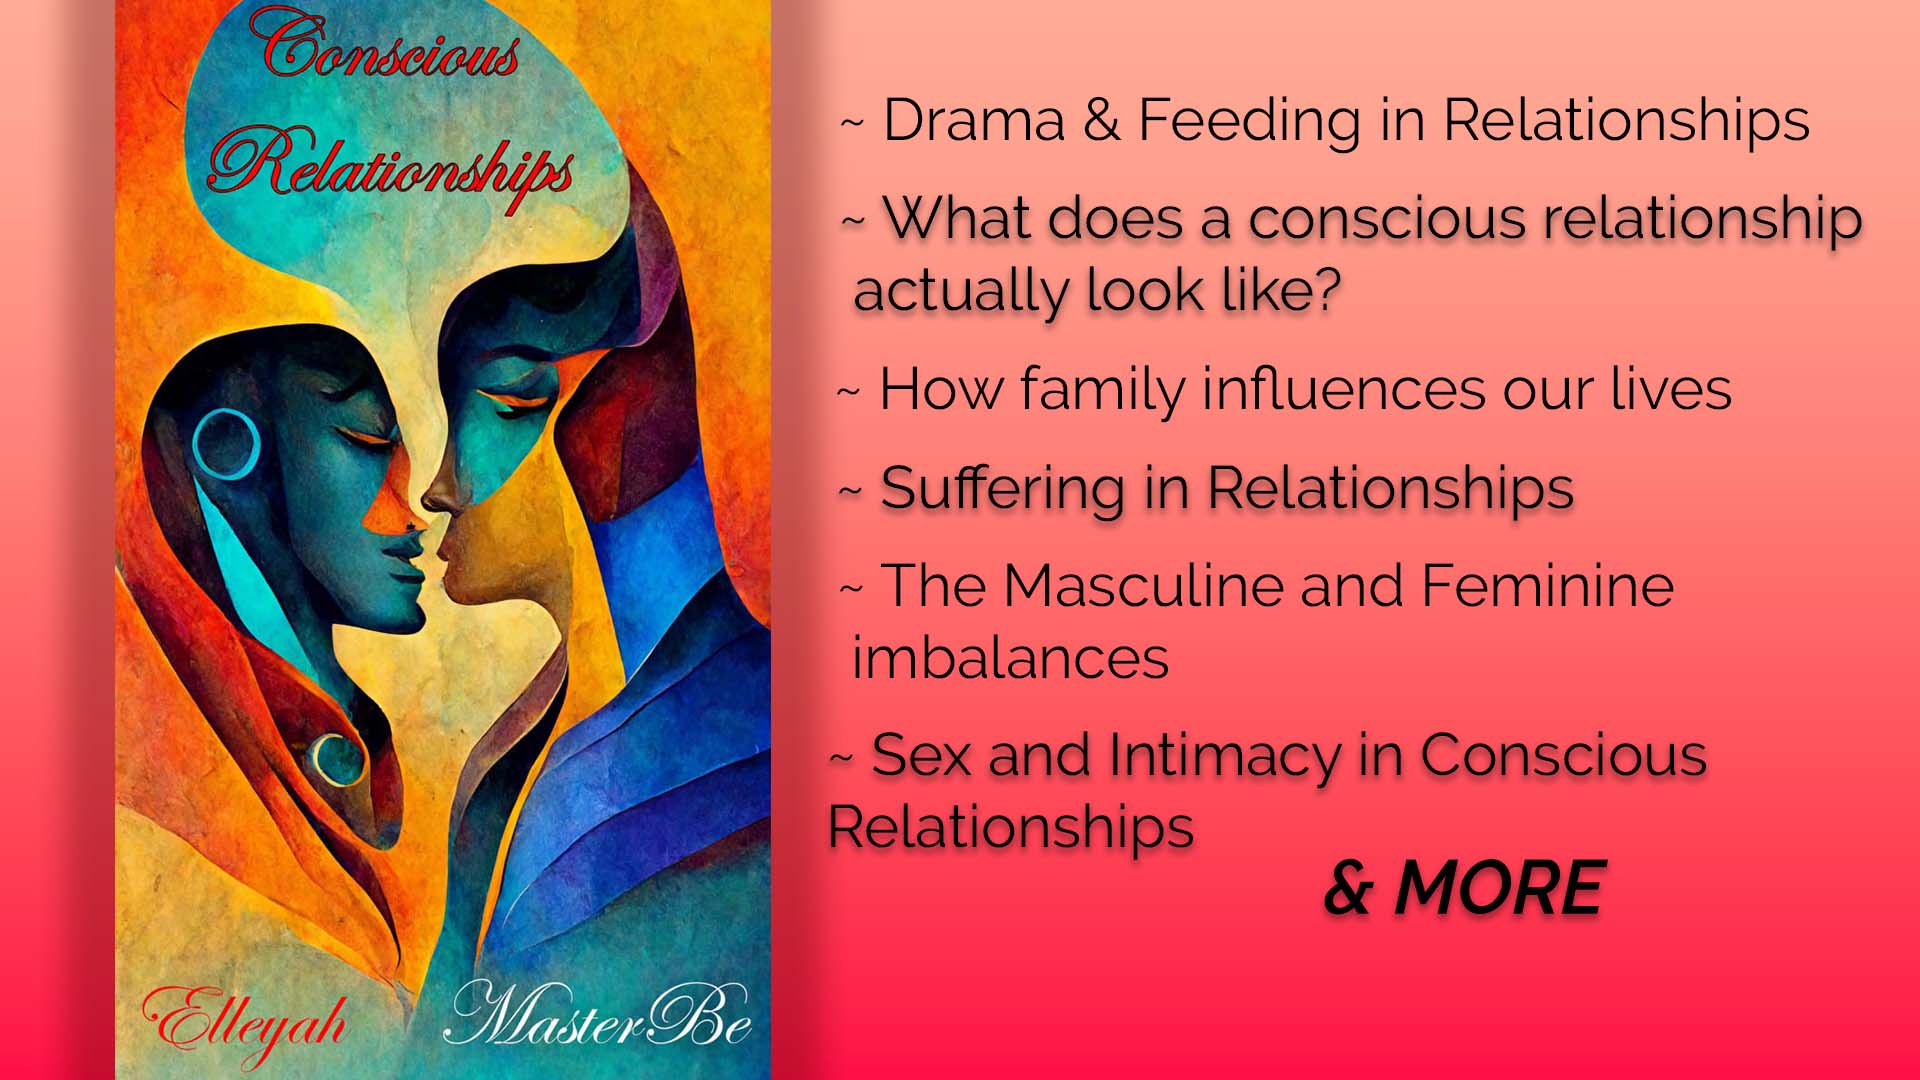 conscious relationships with lady elleyah and master be